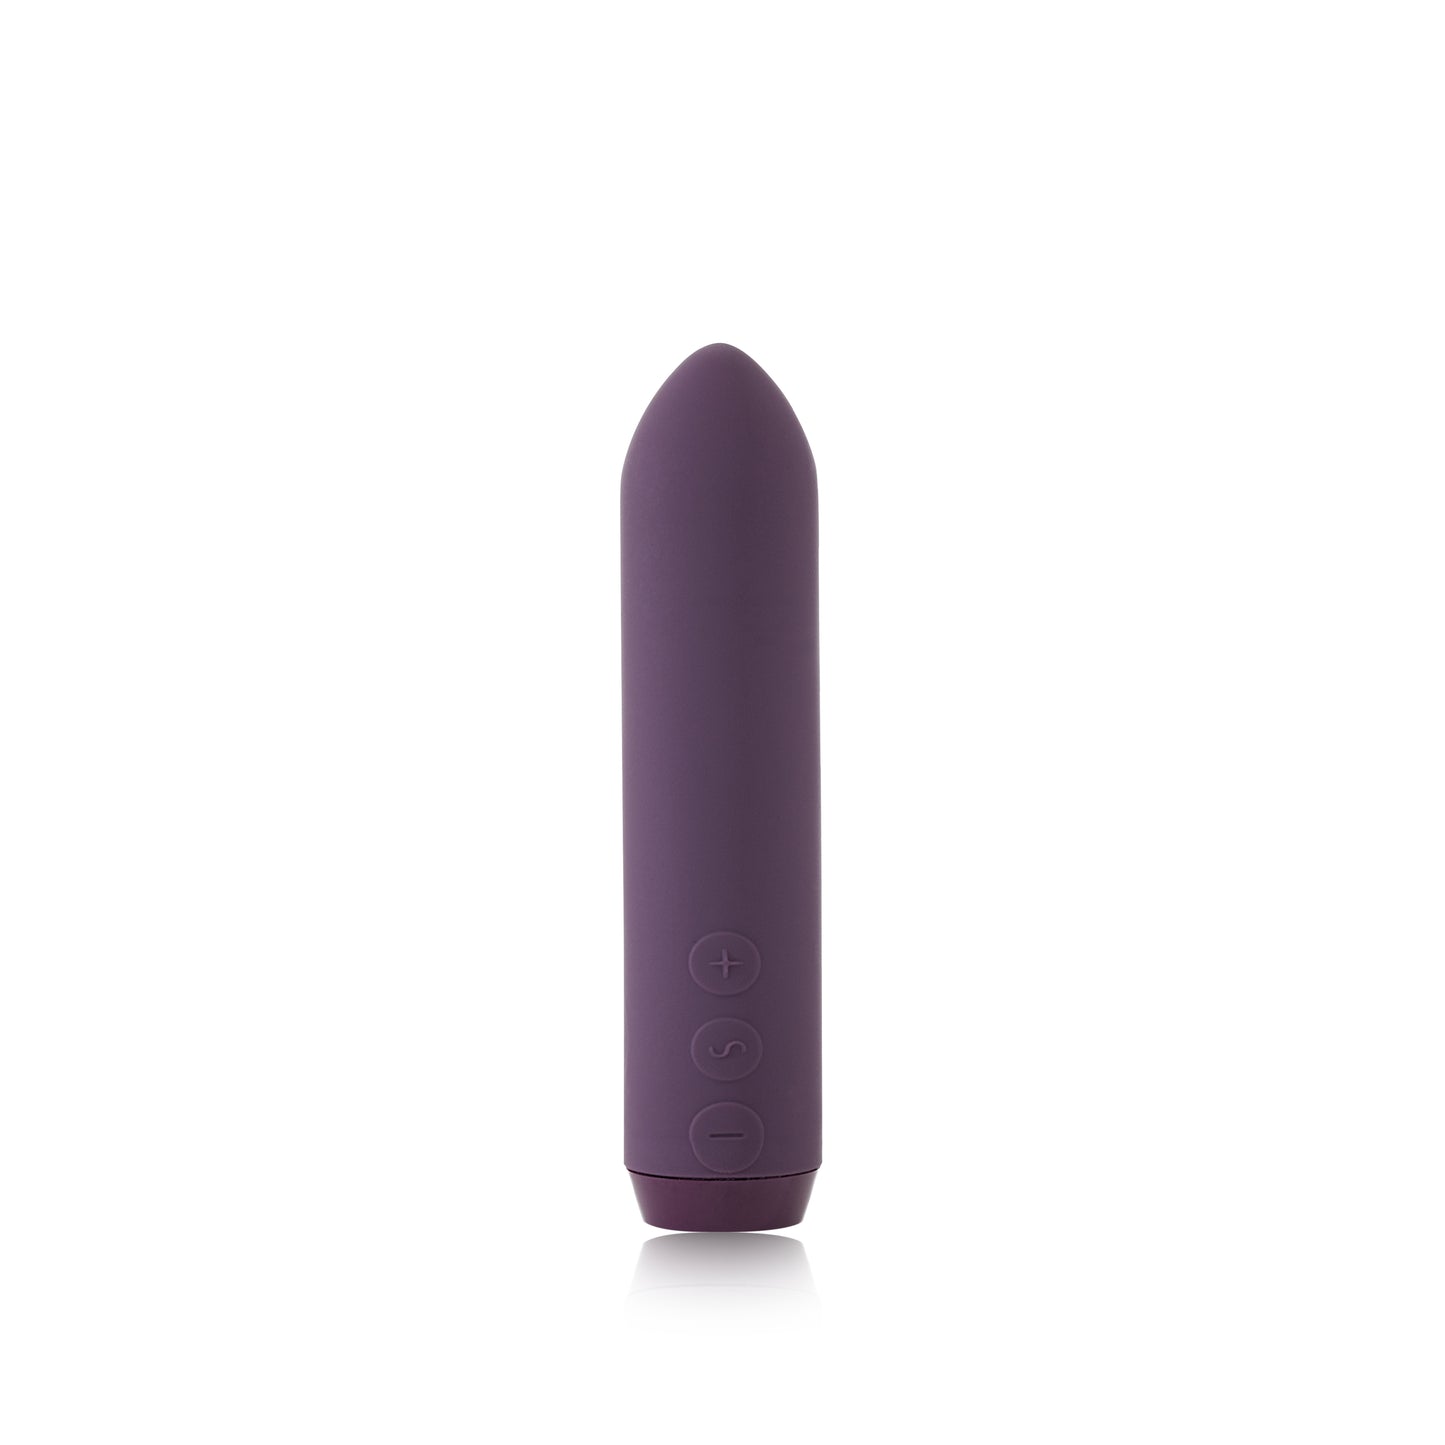 Je Joue Classic Bullet Vibrator in purple on white background